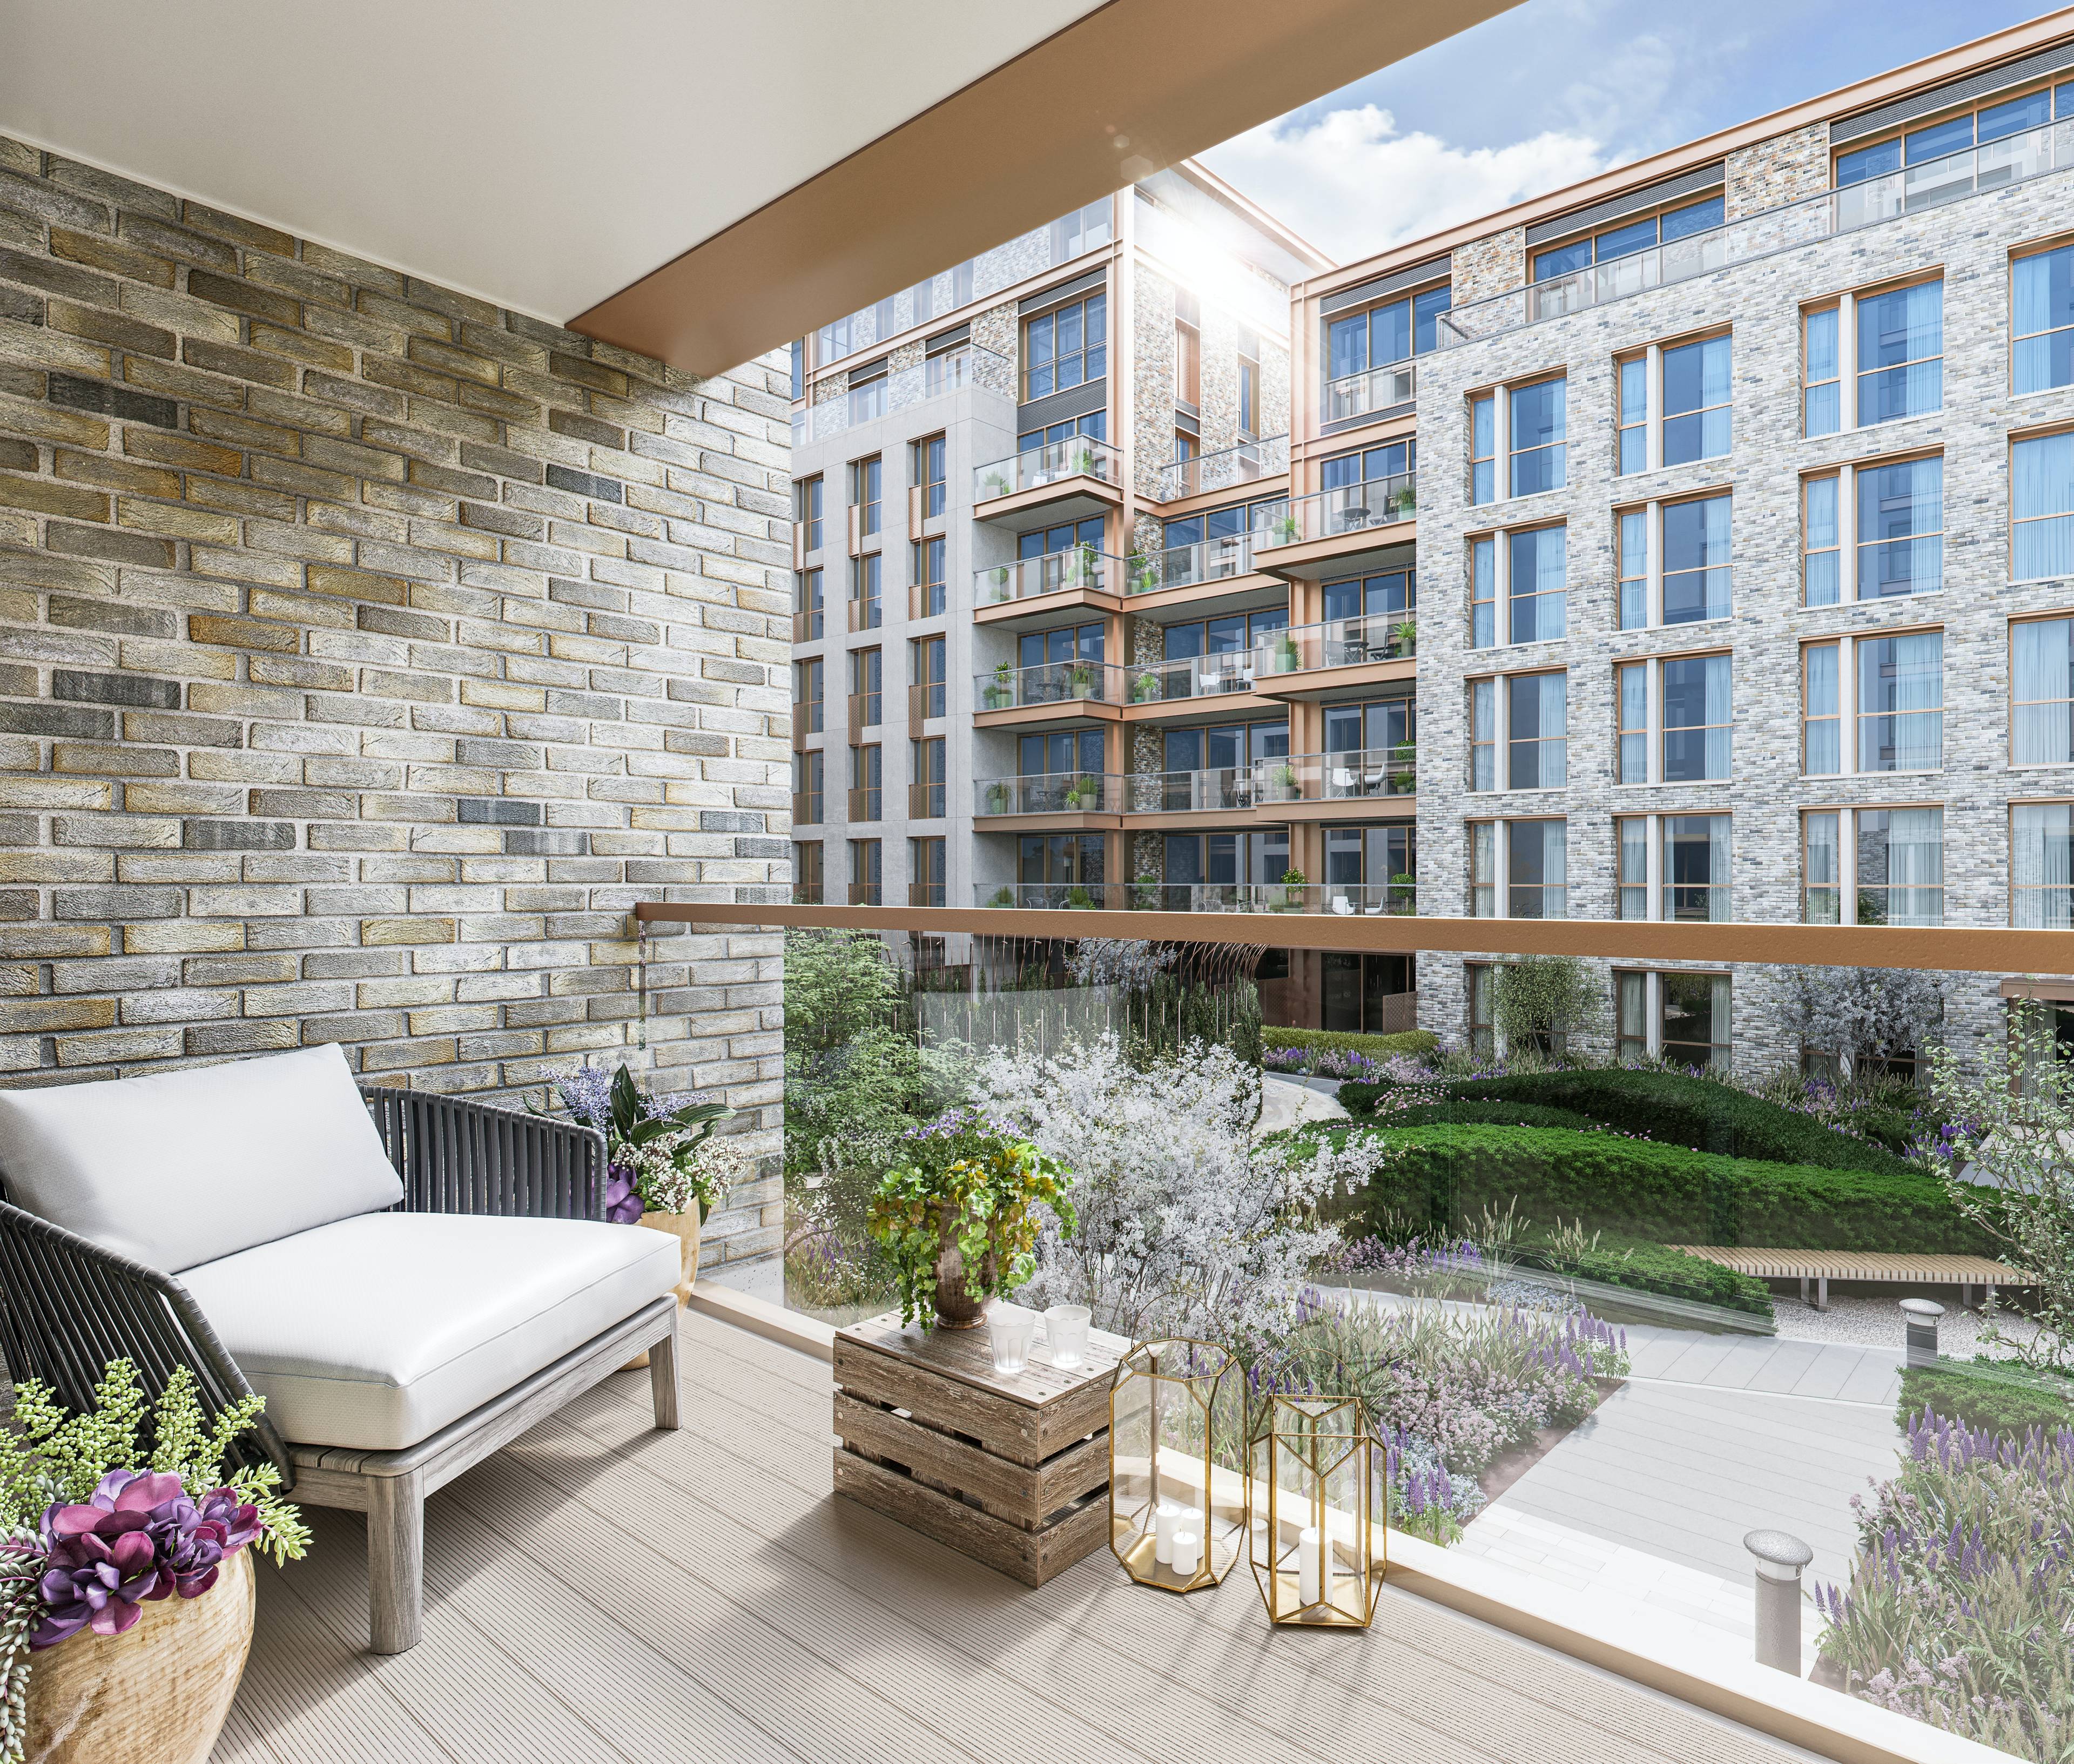 A stylish collection of apartments set within six acres of beautiful landscaping including a public park, square and residents’ garden presents this spacious 2-bed 2-bath East facing apartment at King’s Road Park.